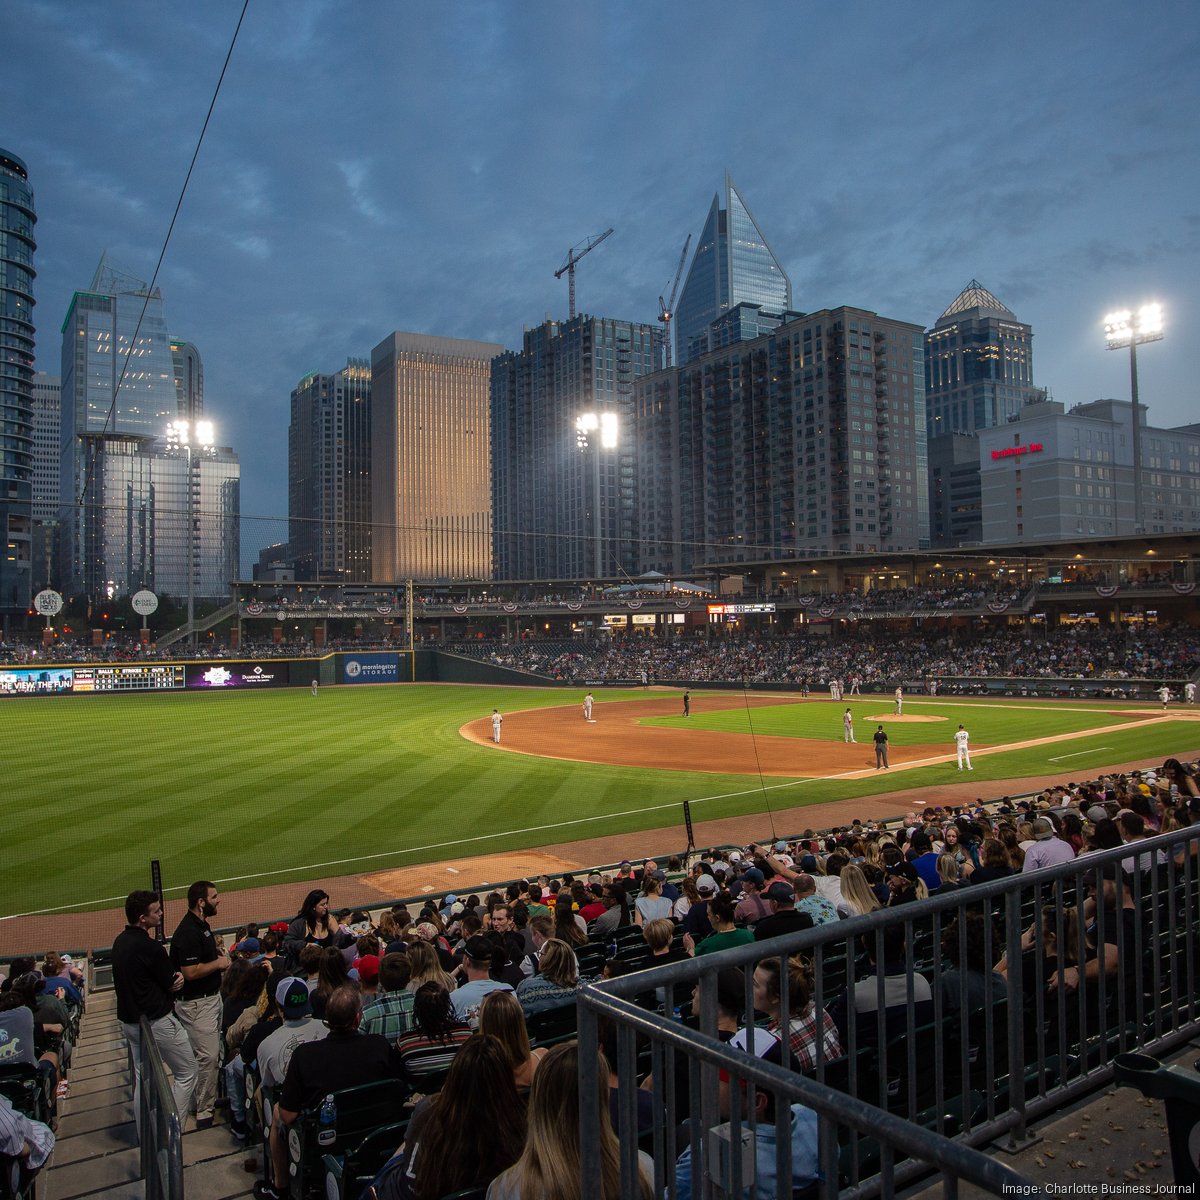 MiLB Charlotte Knights seeing higher revenues across the board